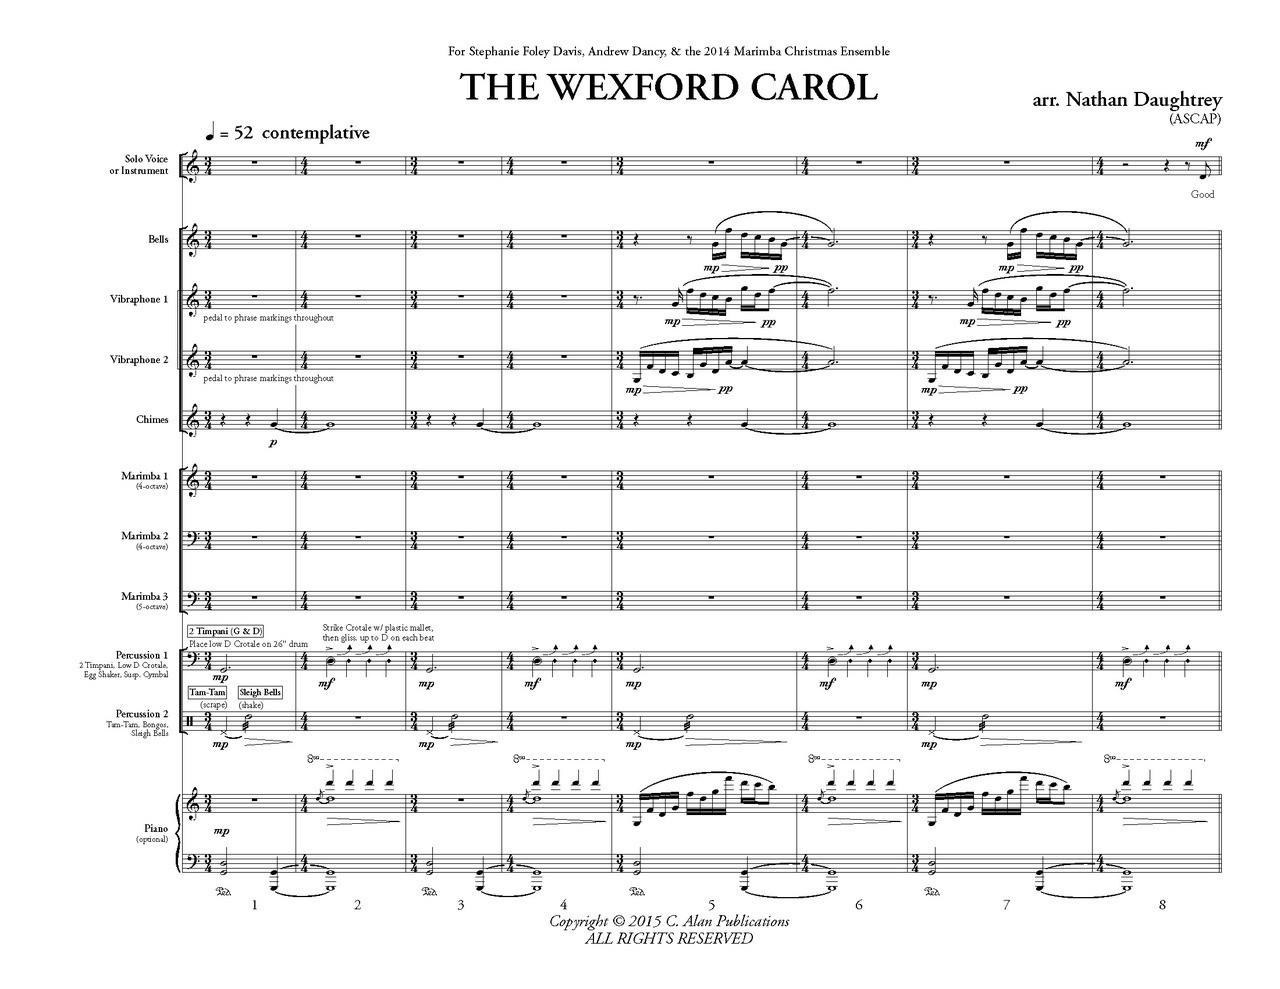 The Wexford Carol arr. Nathan Daughtrey